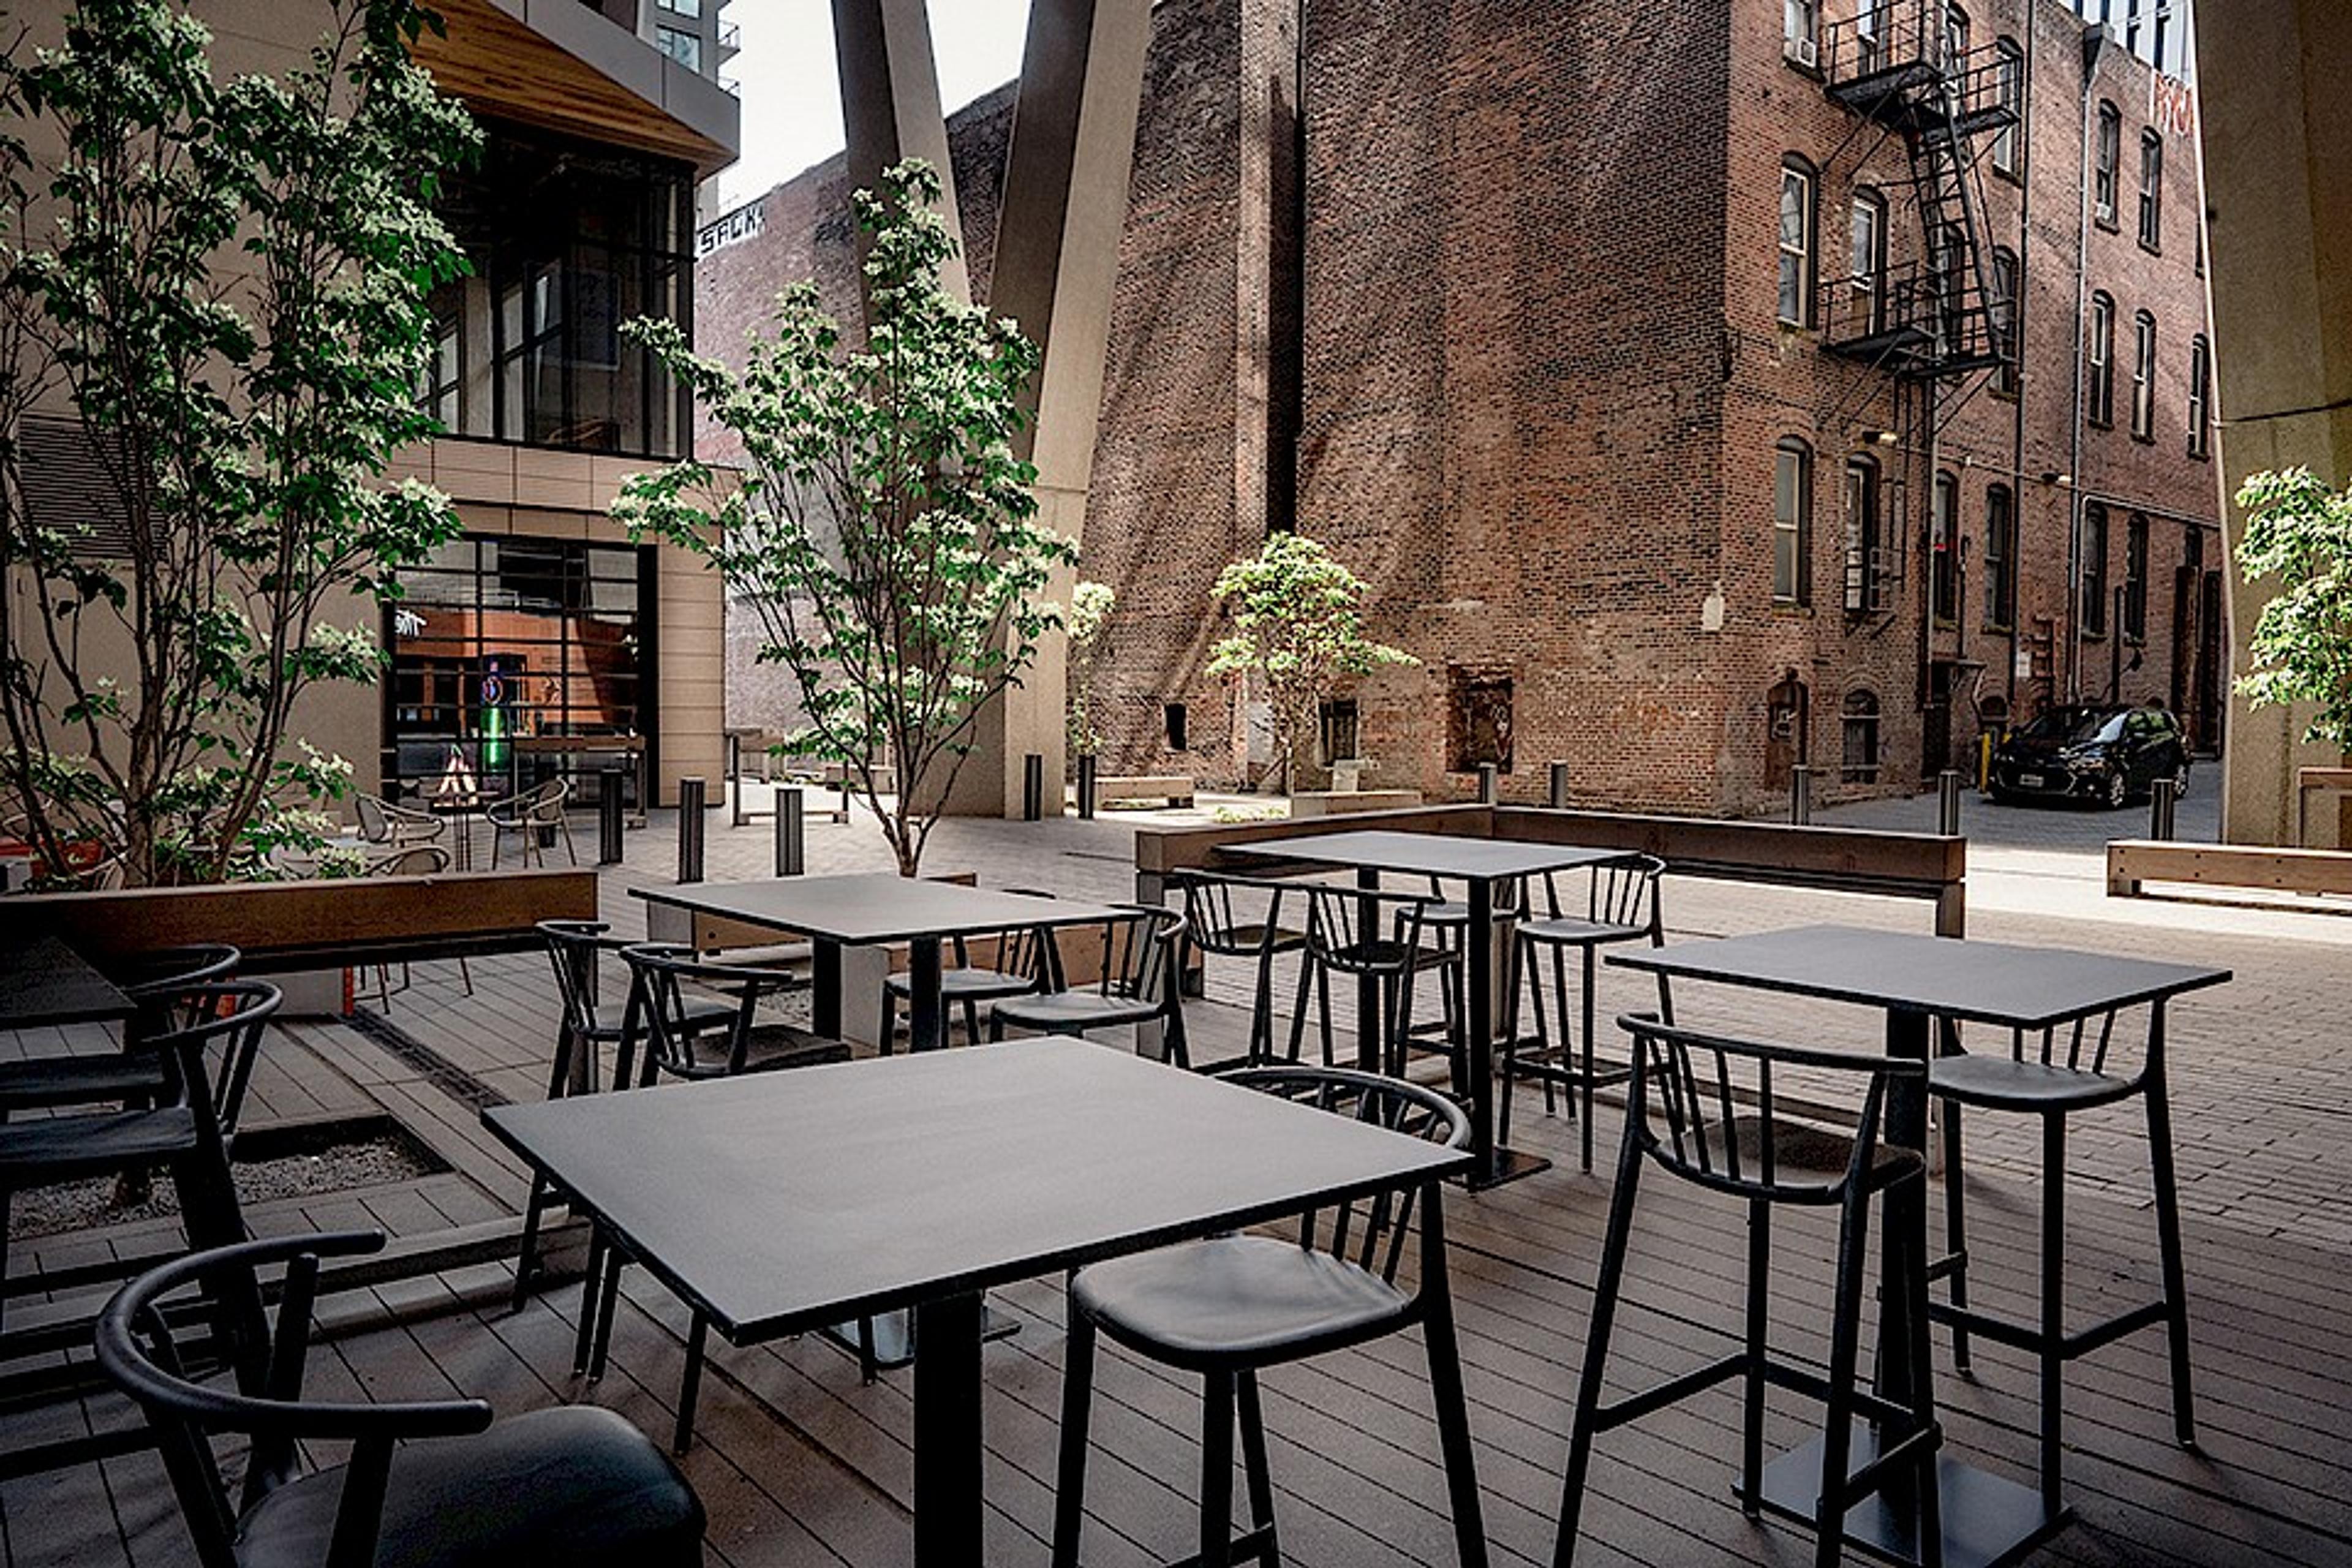 patio tables looking out onto piazza style courtyard with old brick building and trees